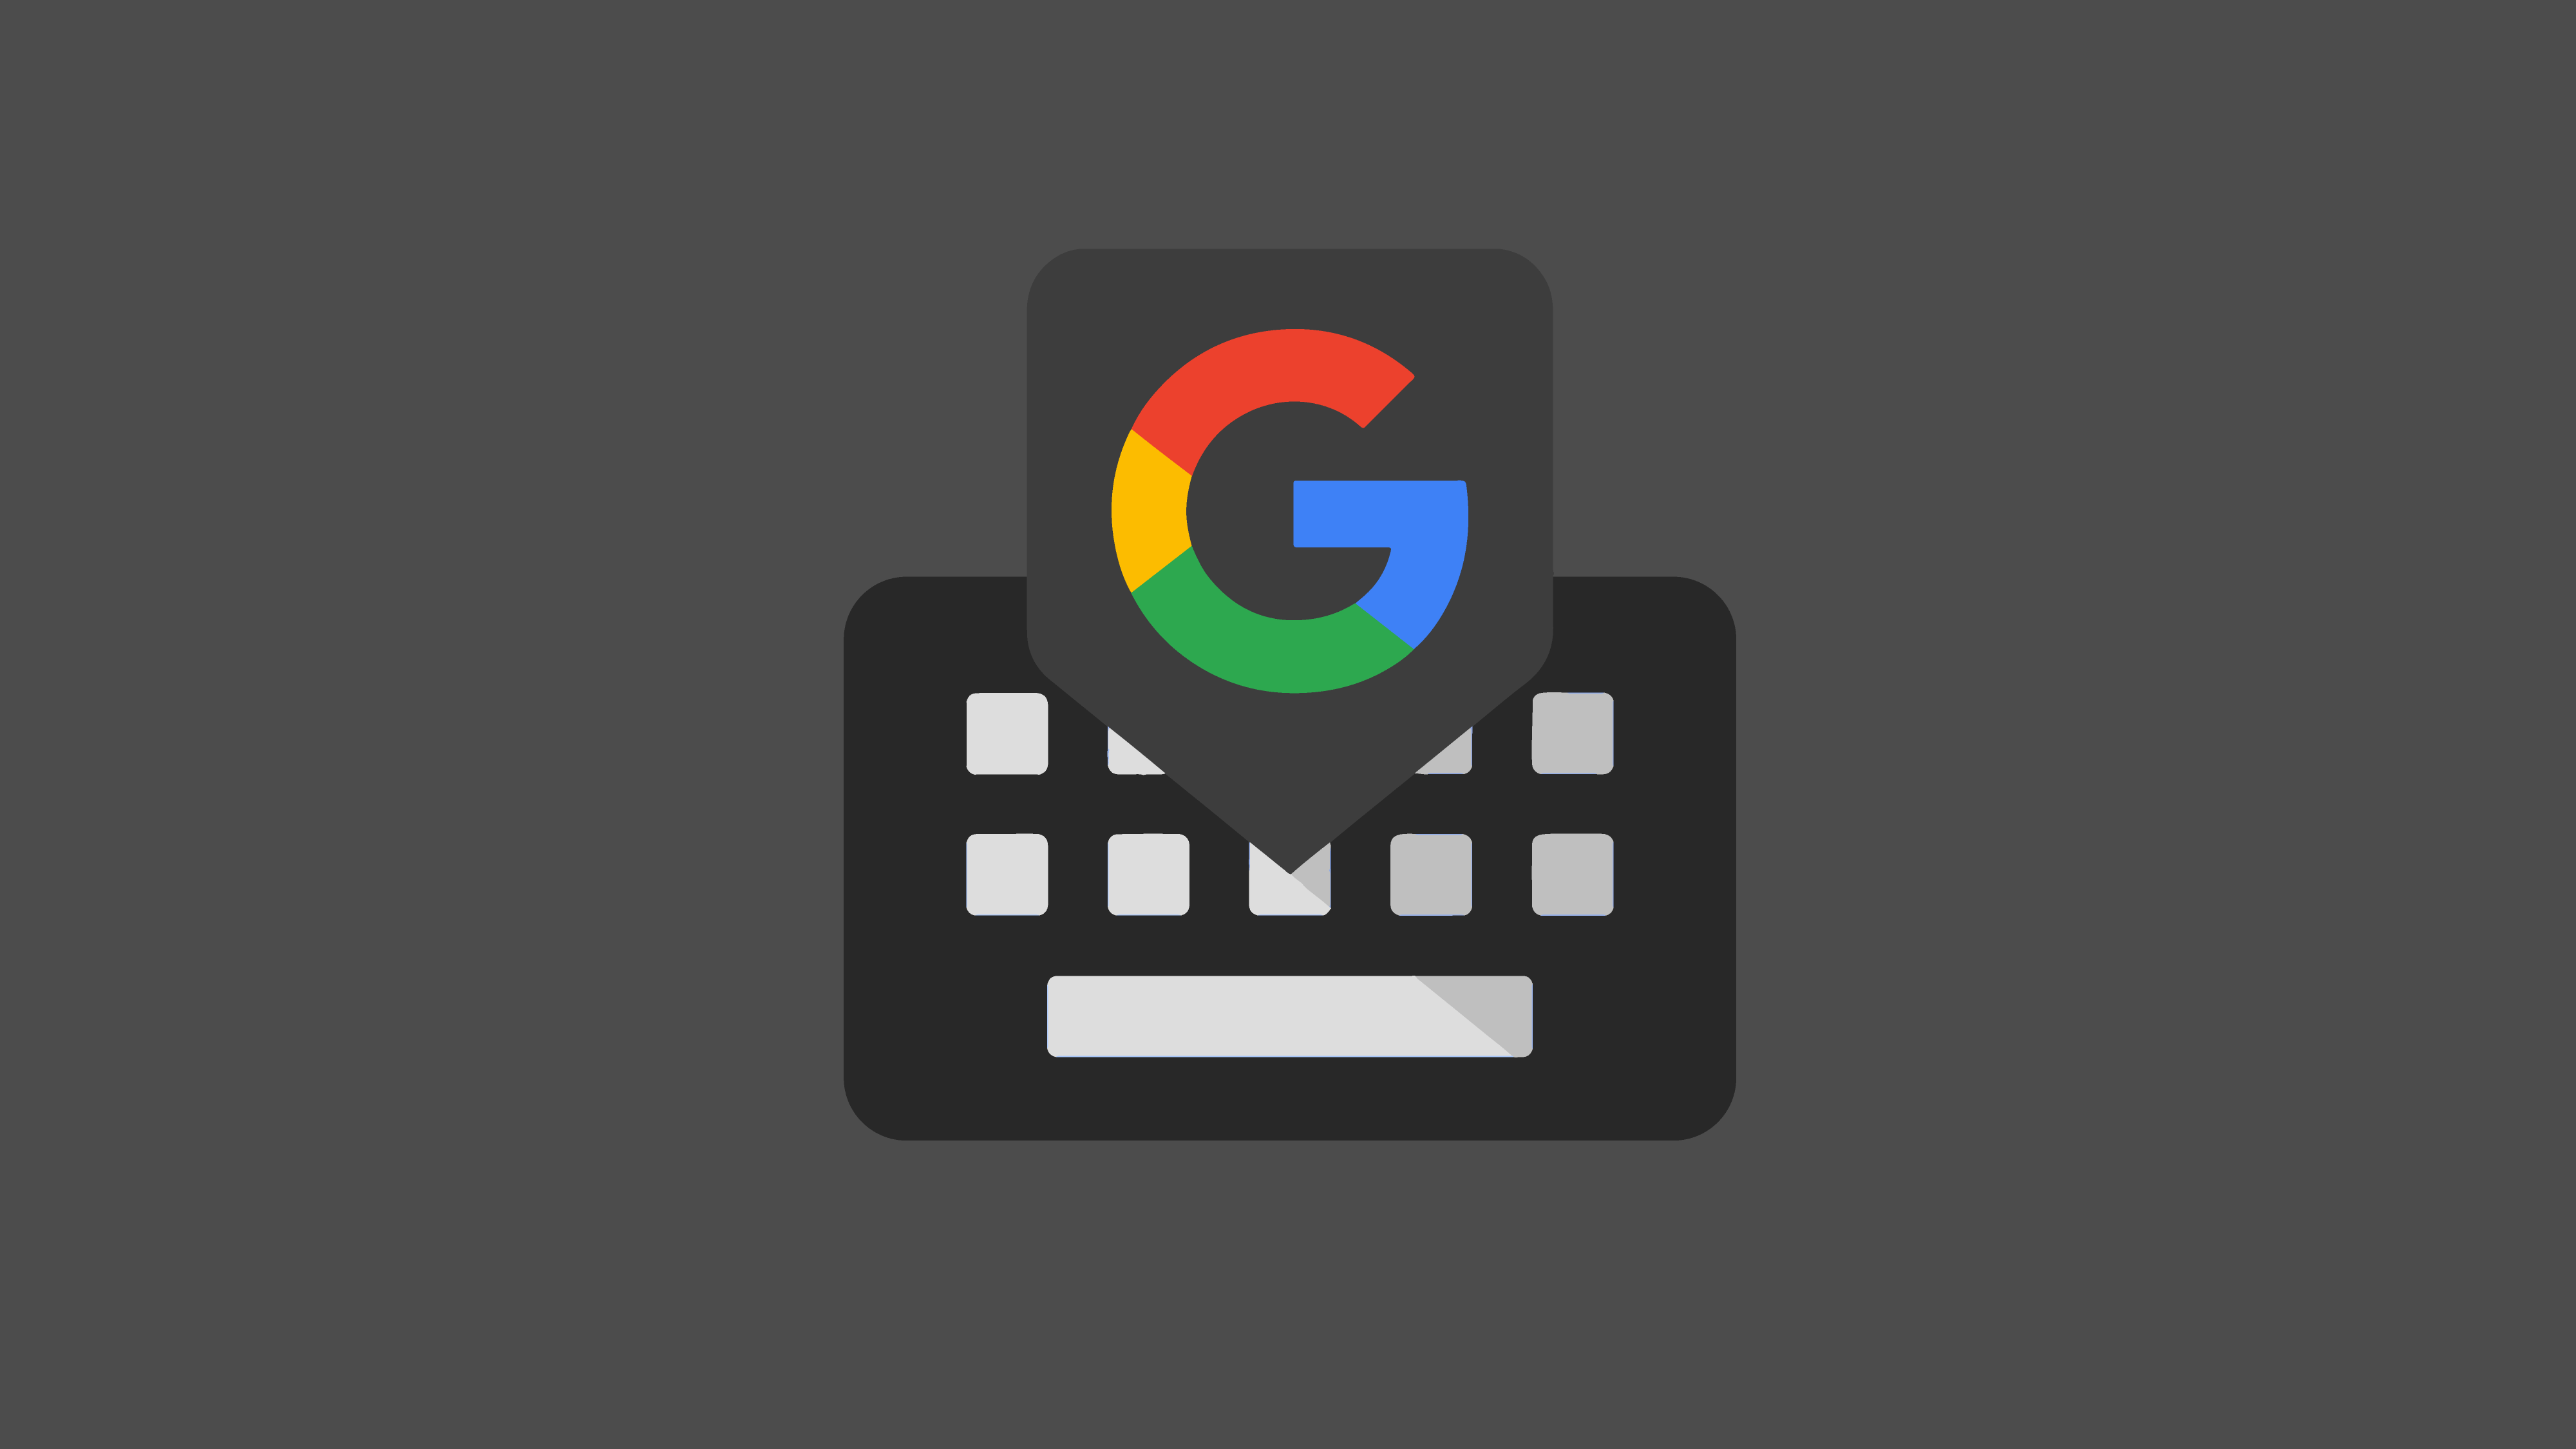 The Google logo on top of a drawing of a keyboard